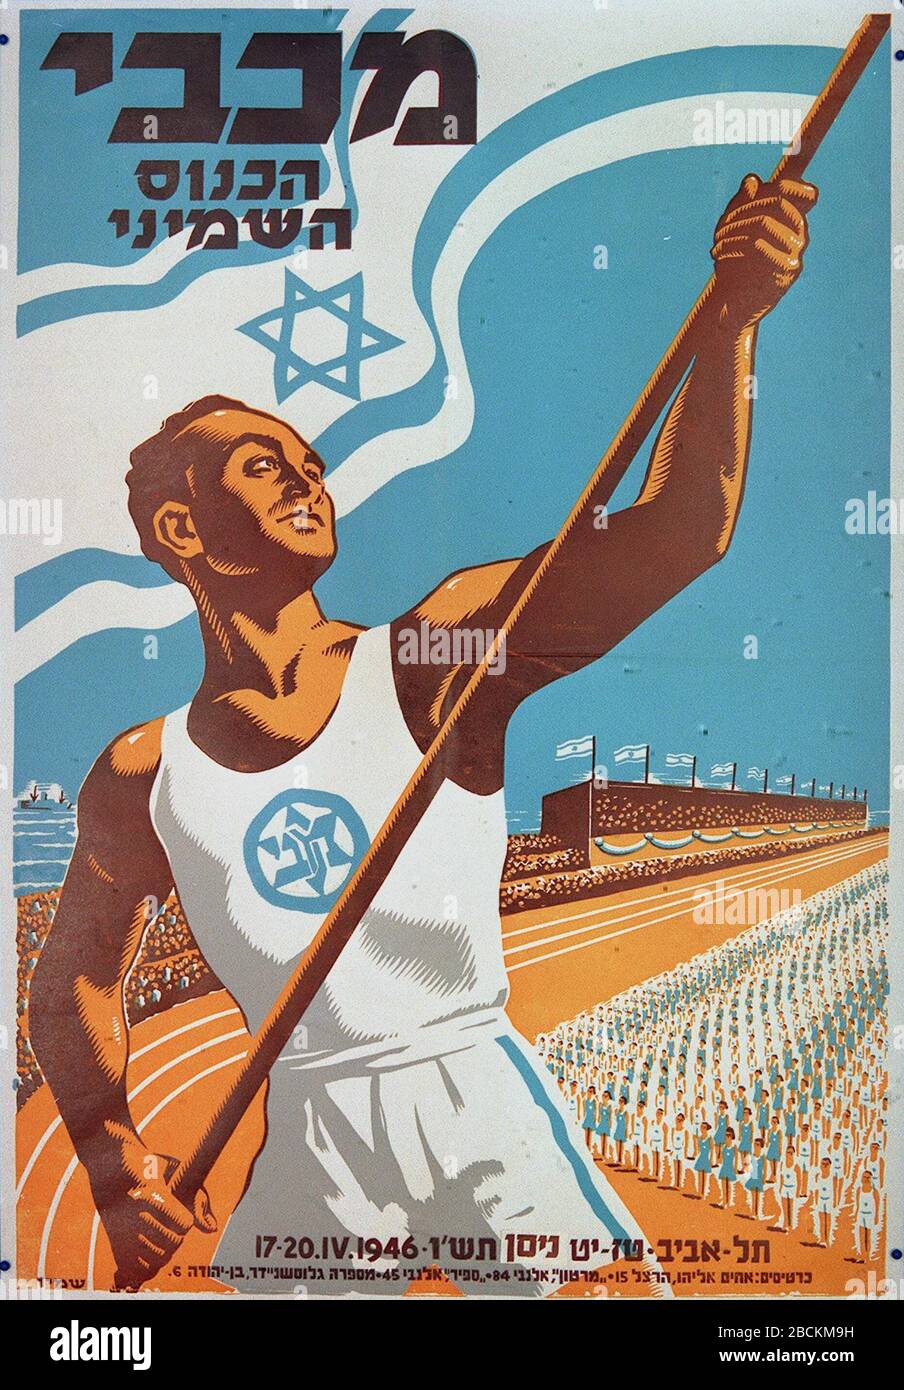 English Poster From The Eighth Annual Maccabiah Gathering In Tel Aviv 1946 O N I C U I O O I I C U O O C U U O E O U O E O I E O U E E O E 17 April 1946 This Is Available From